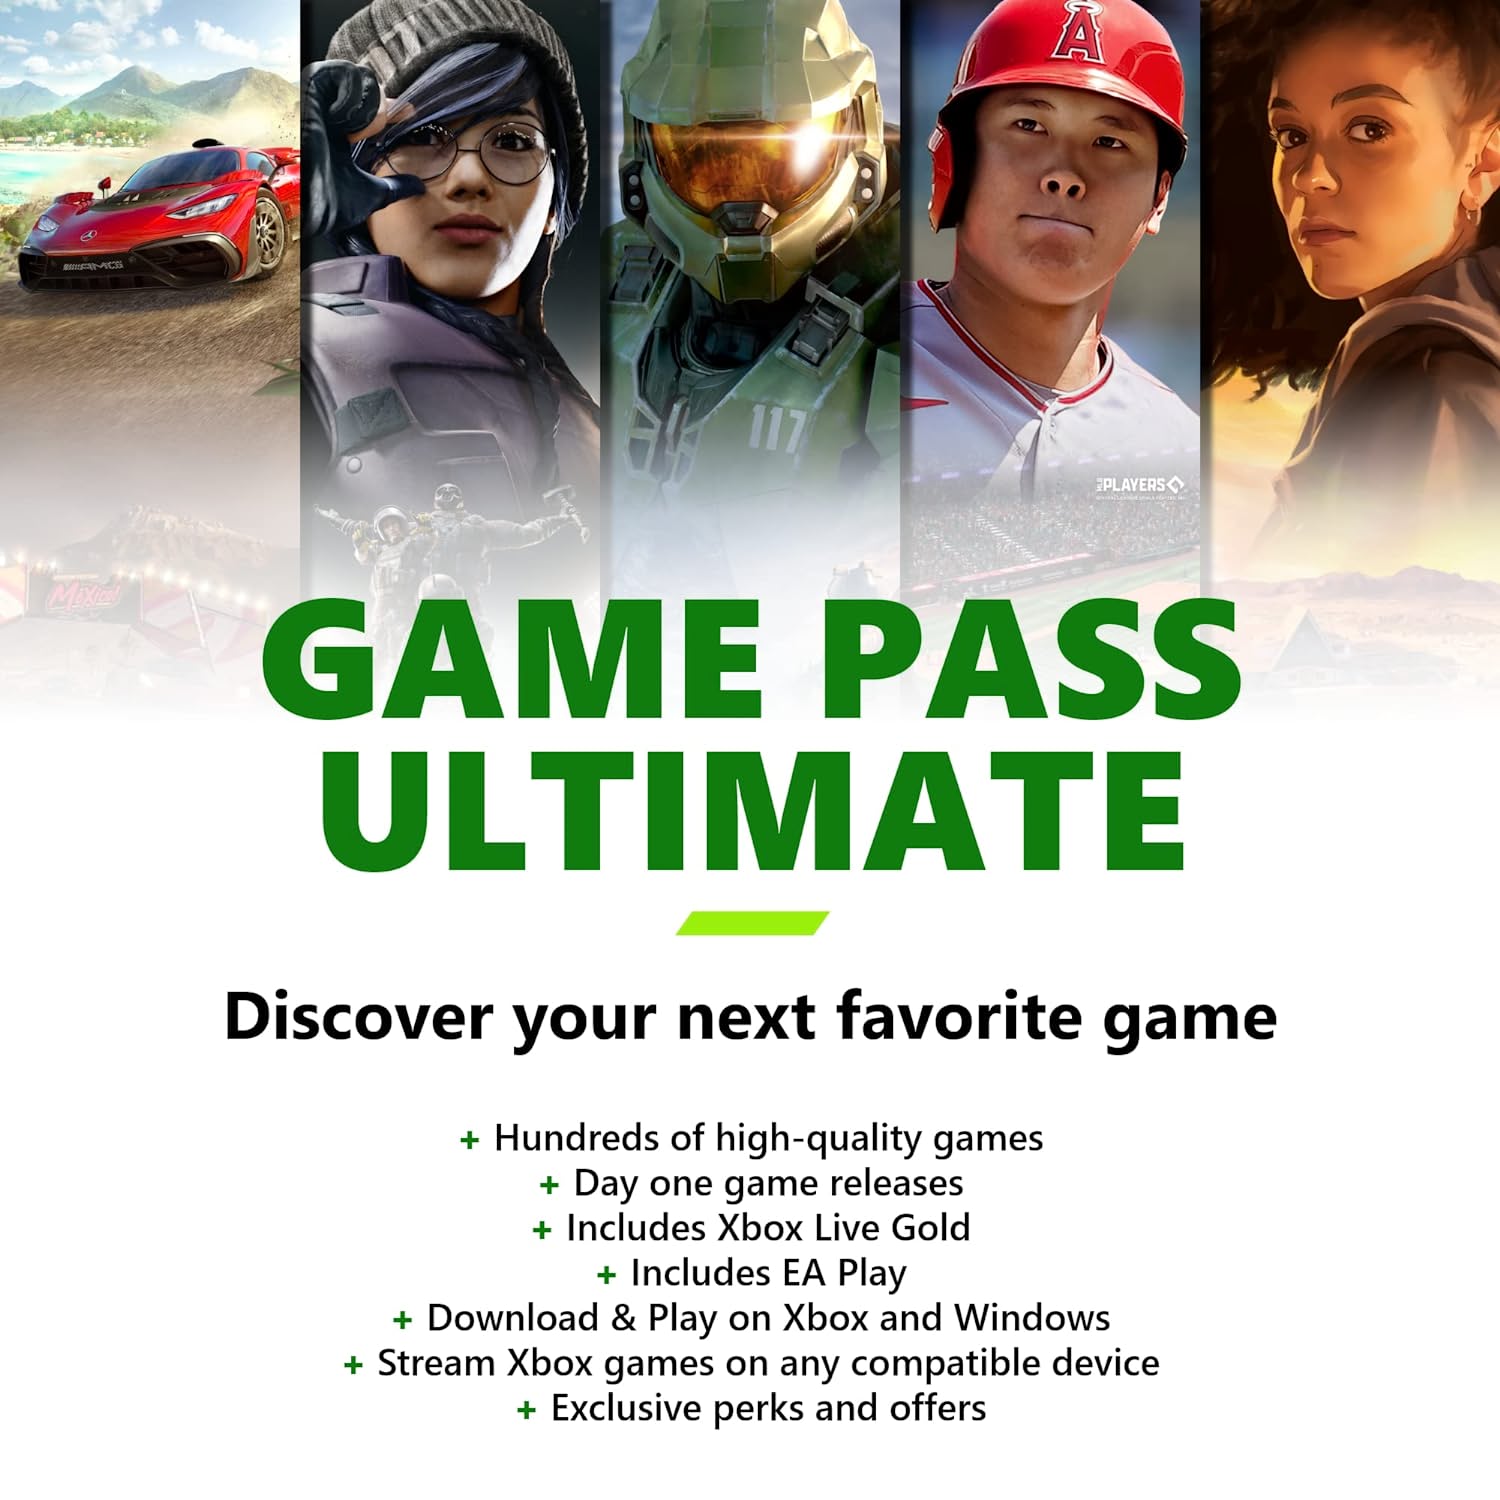 🟢XBOX GAME PASS ULTIMATE 1-2-4-7-10-12 MONTHS🚀FAST